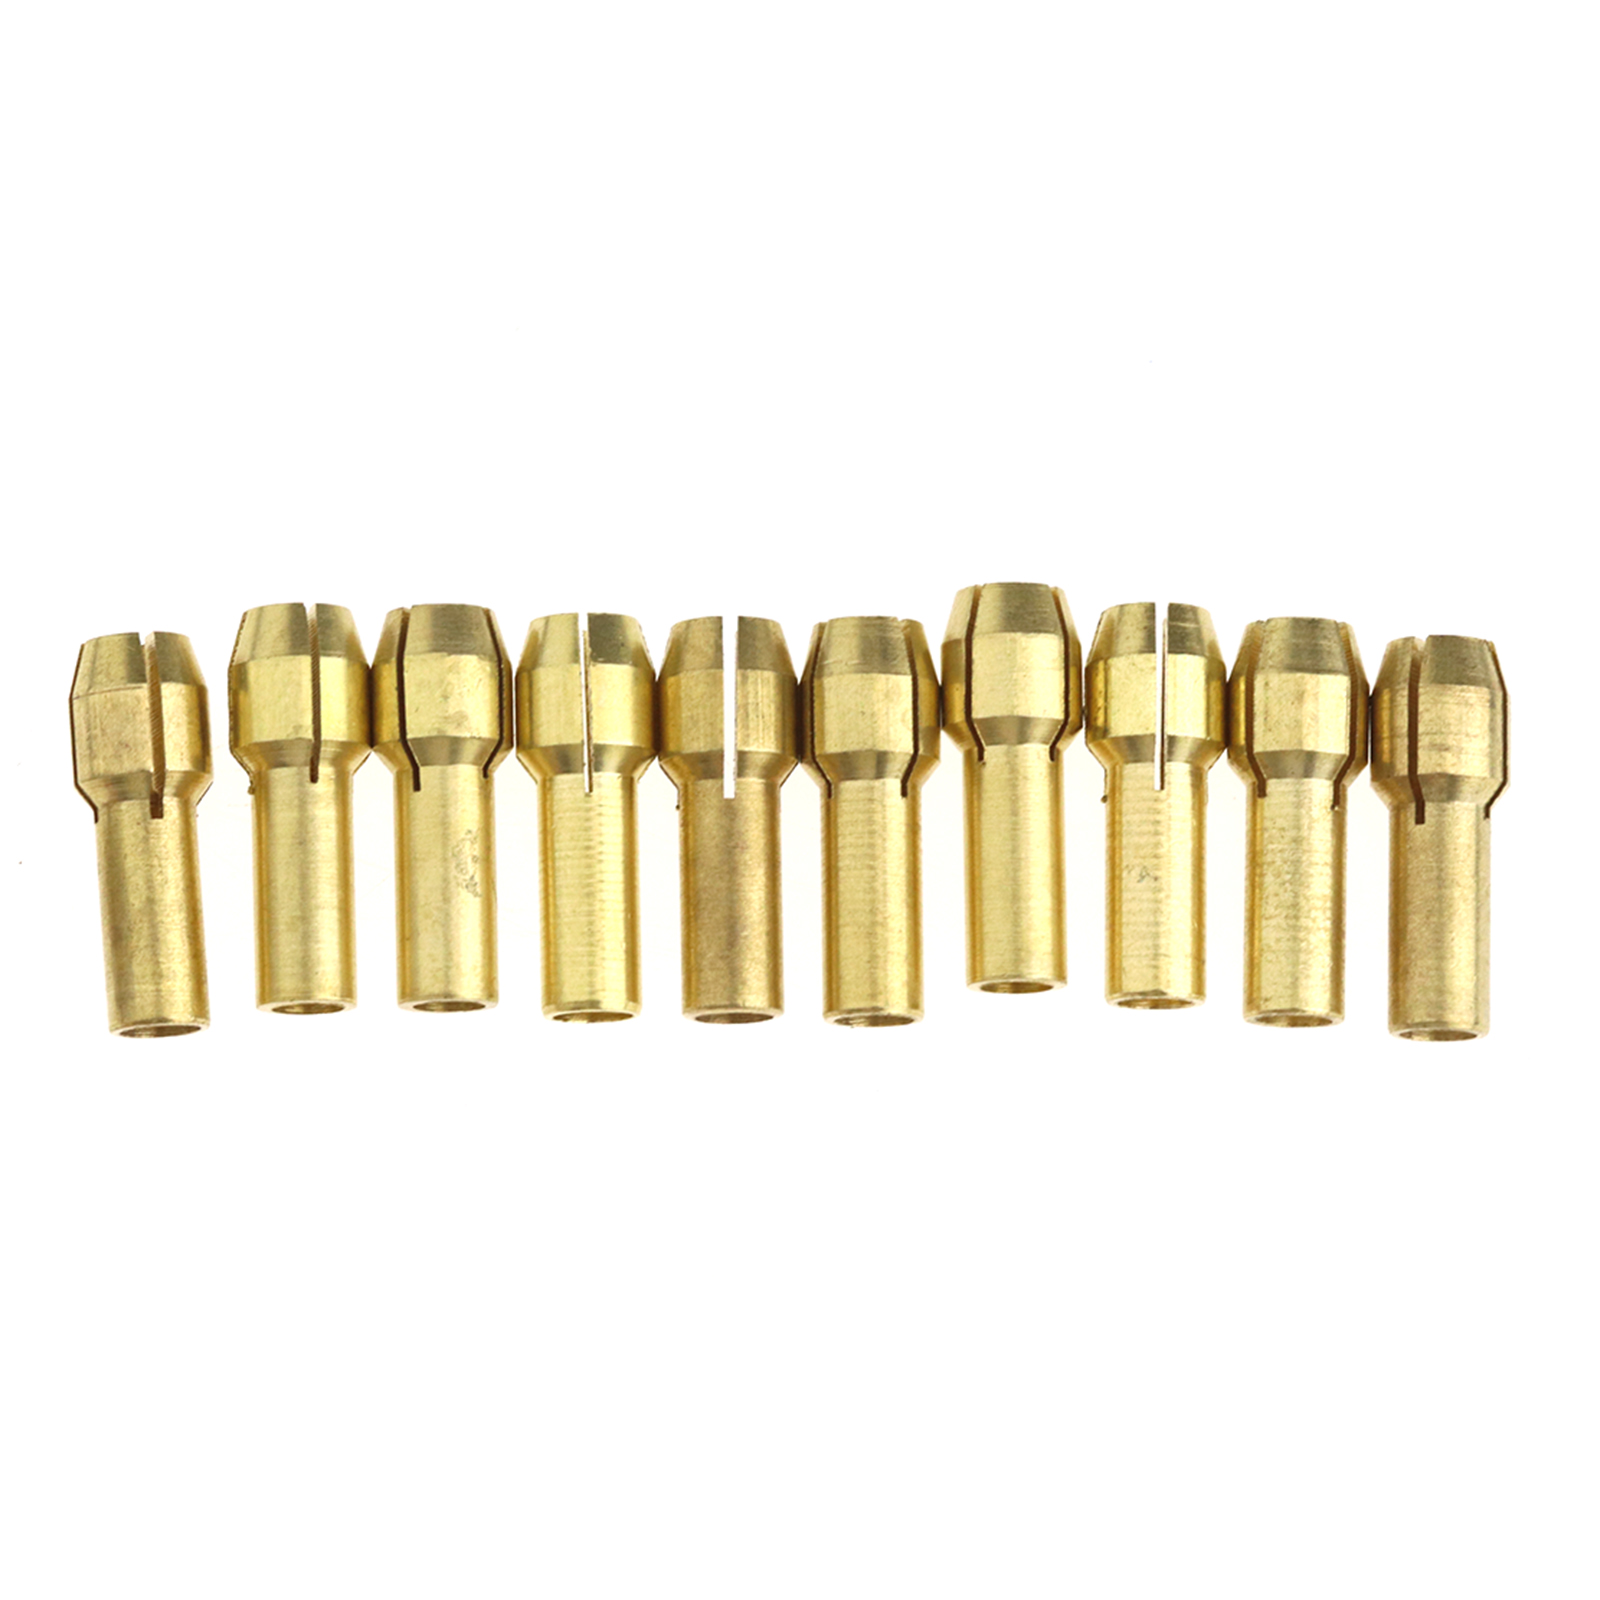 10Pcs 0.5mm-3.2mm Brass Drill Chuck Collet Bits 4.3mm Shank For Rotary ...